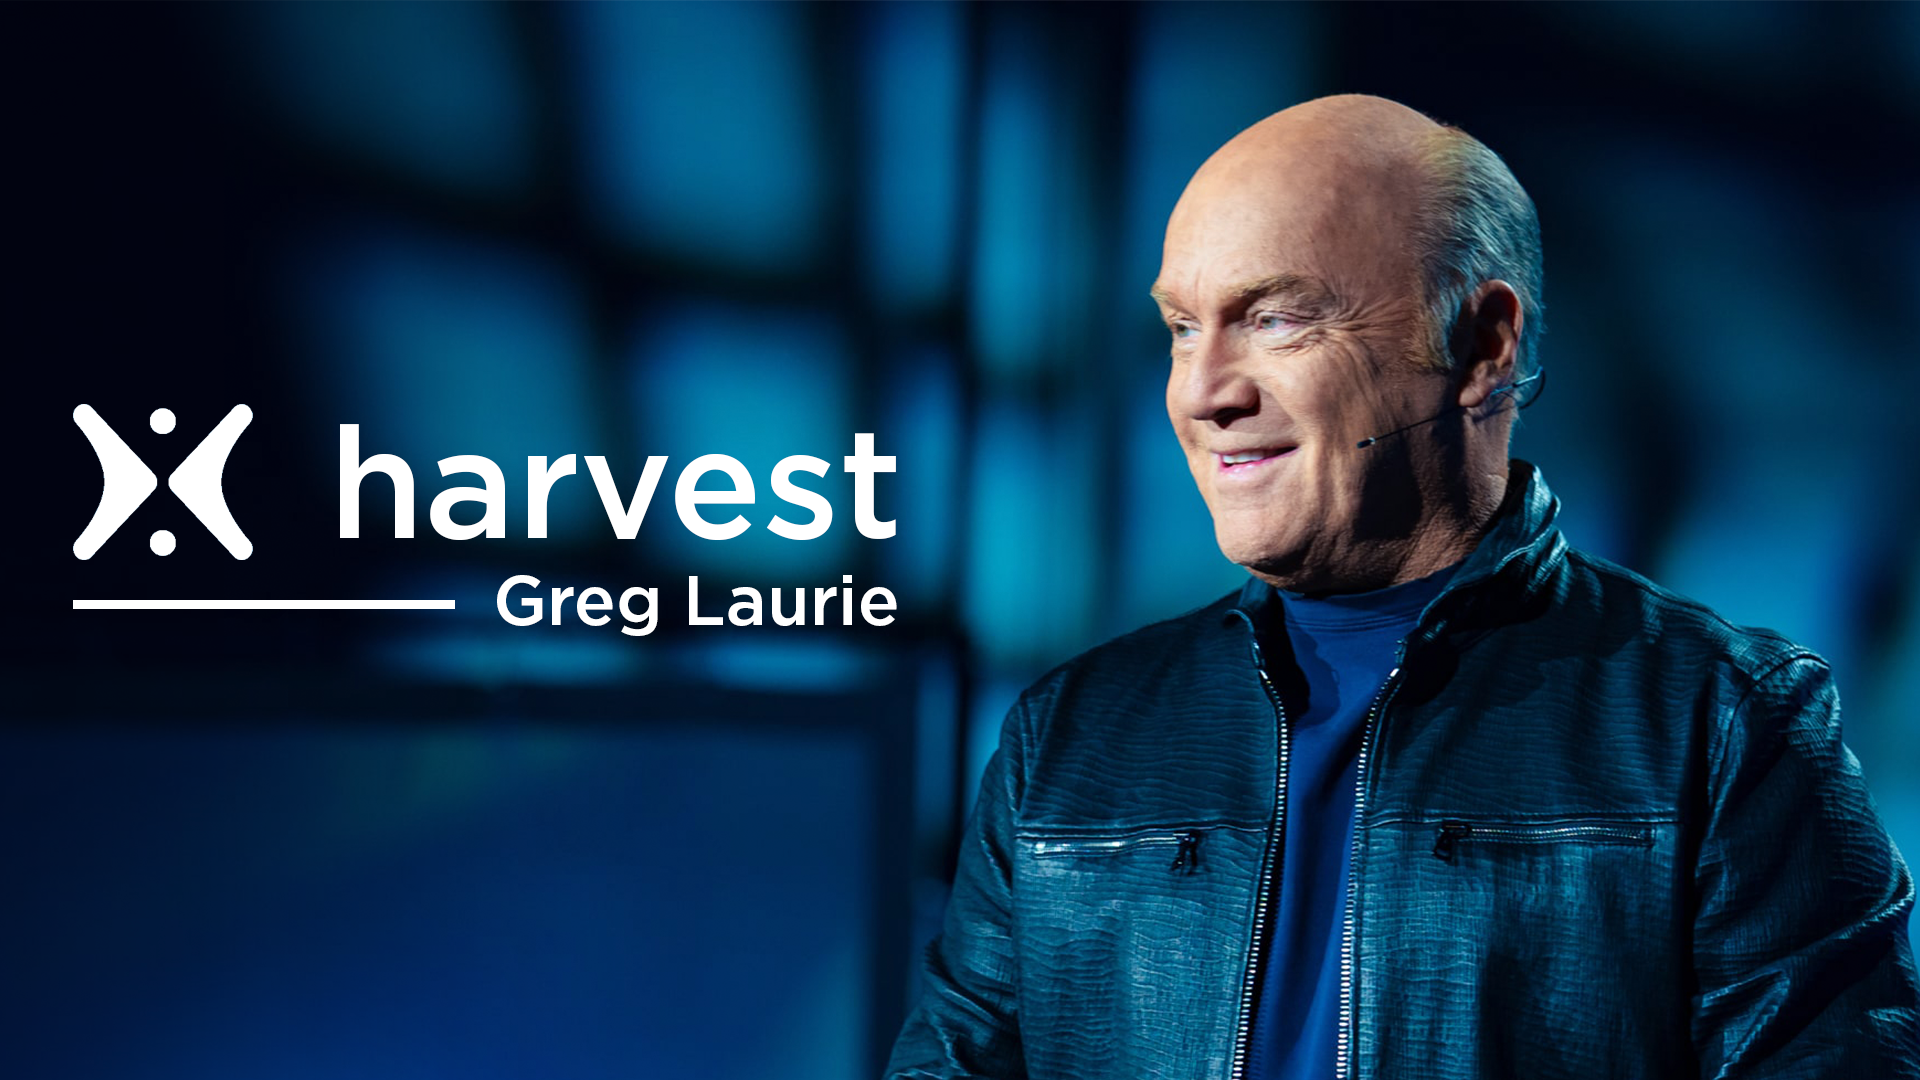 Harvest with Pastor Greg Laurie on TBN